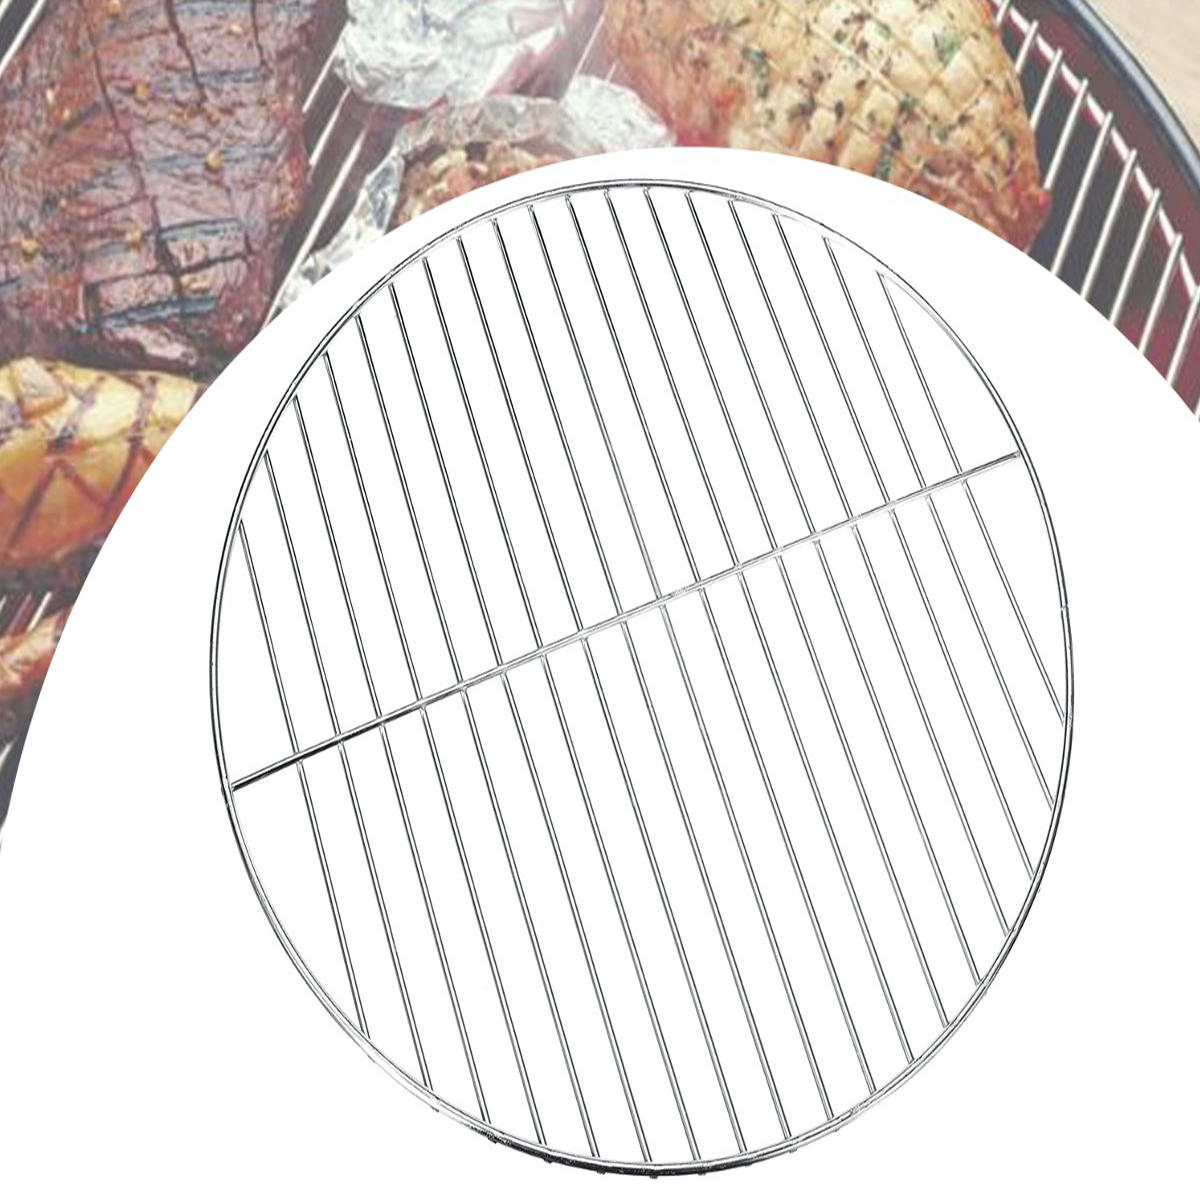 25cm Round BBQ Grill Grate Charcoal BBQ Grill Pan Replacement Metal Cooking Barbecue Mesh Frame